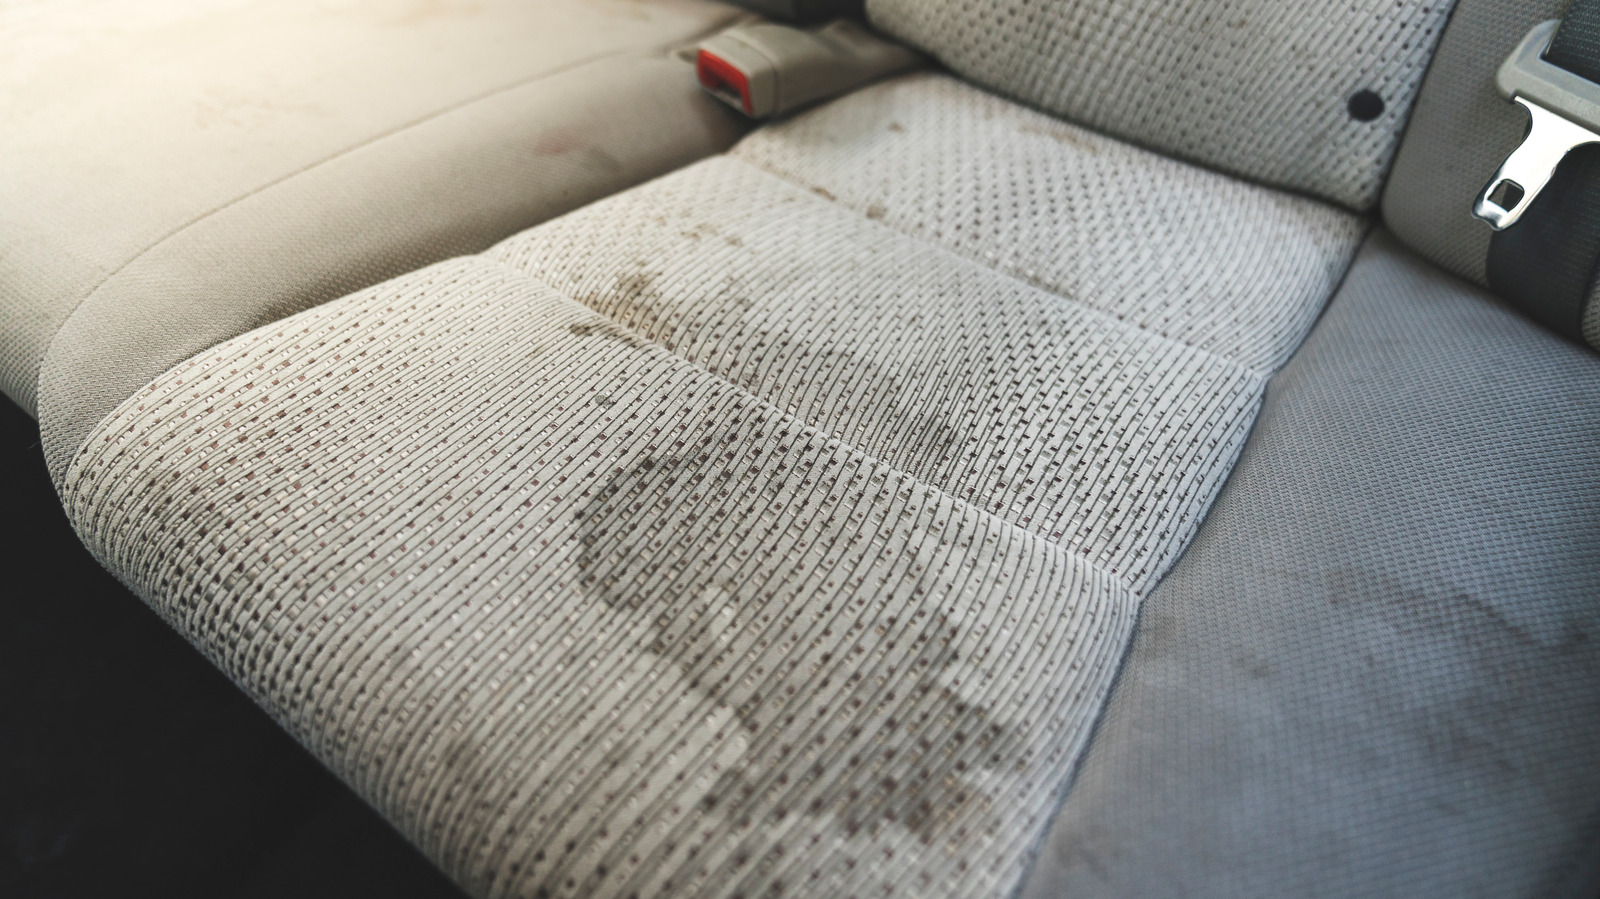 How To Remove Stains From Your Car Seats